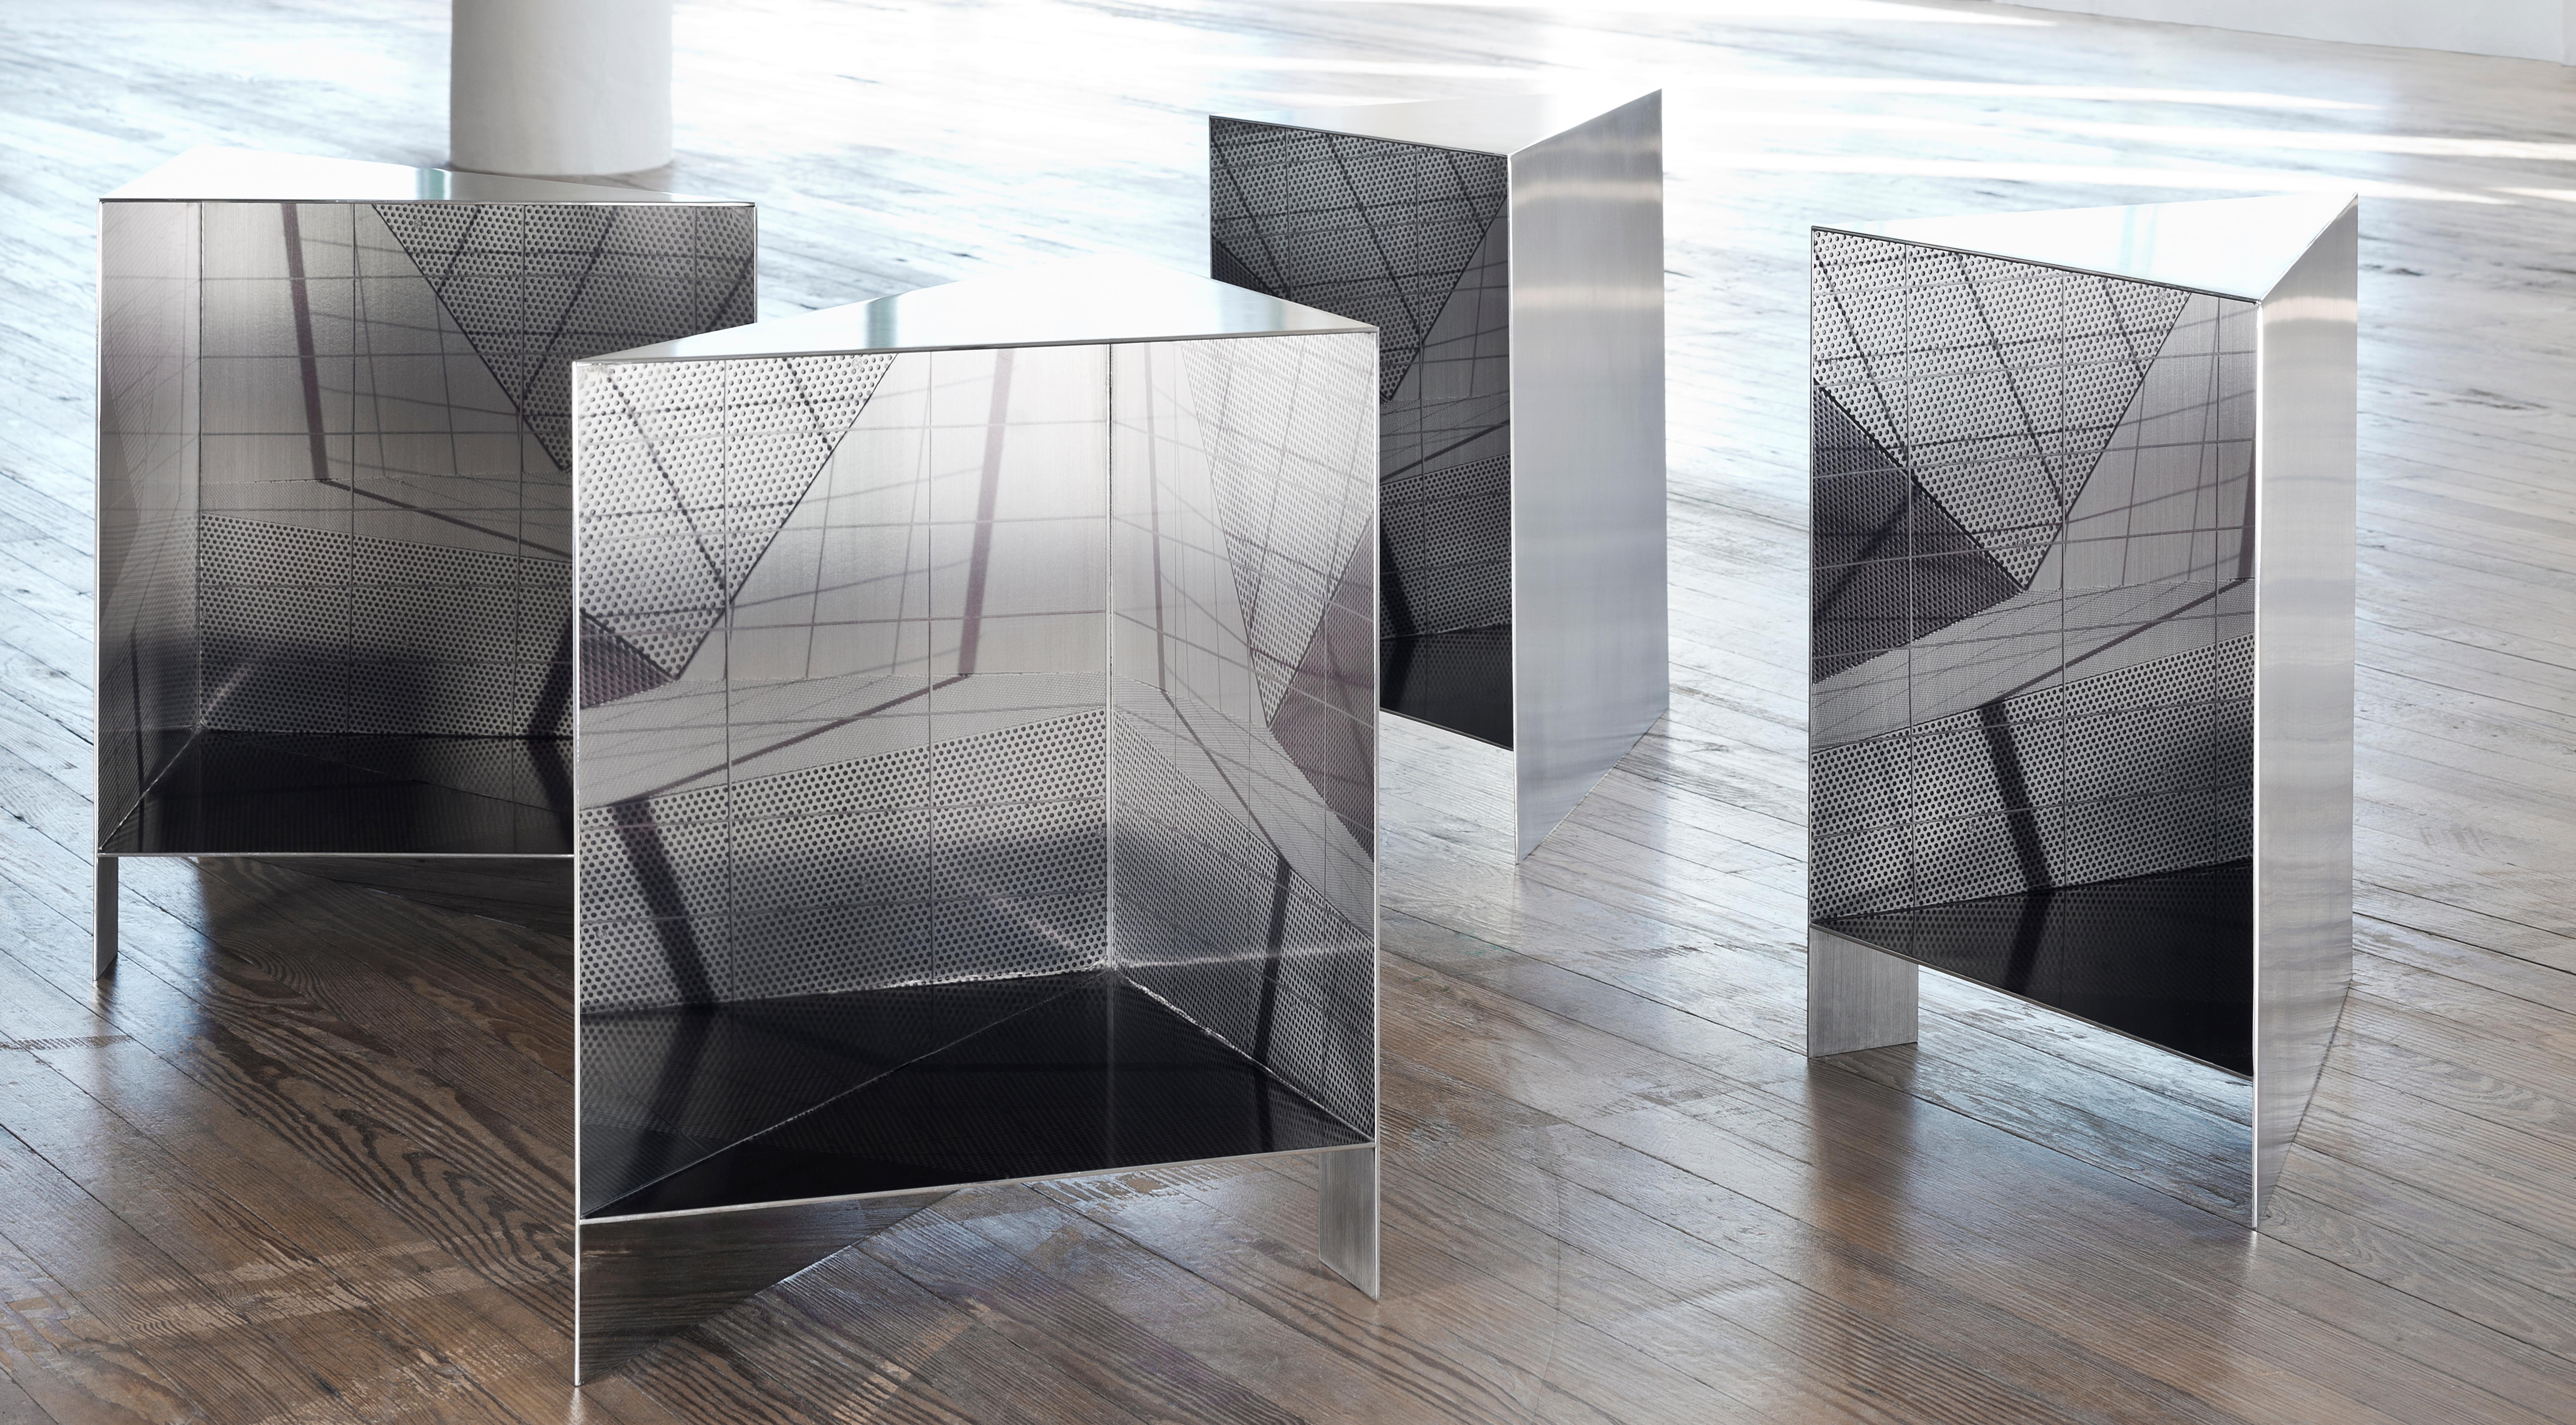 Bauhaus Set of 4 Contemporary Stainless Steal Handcrafted Side Tables by Luis Pons For Sale